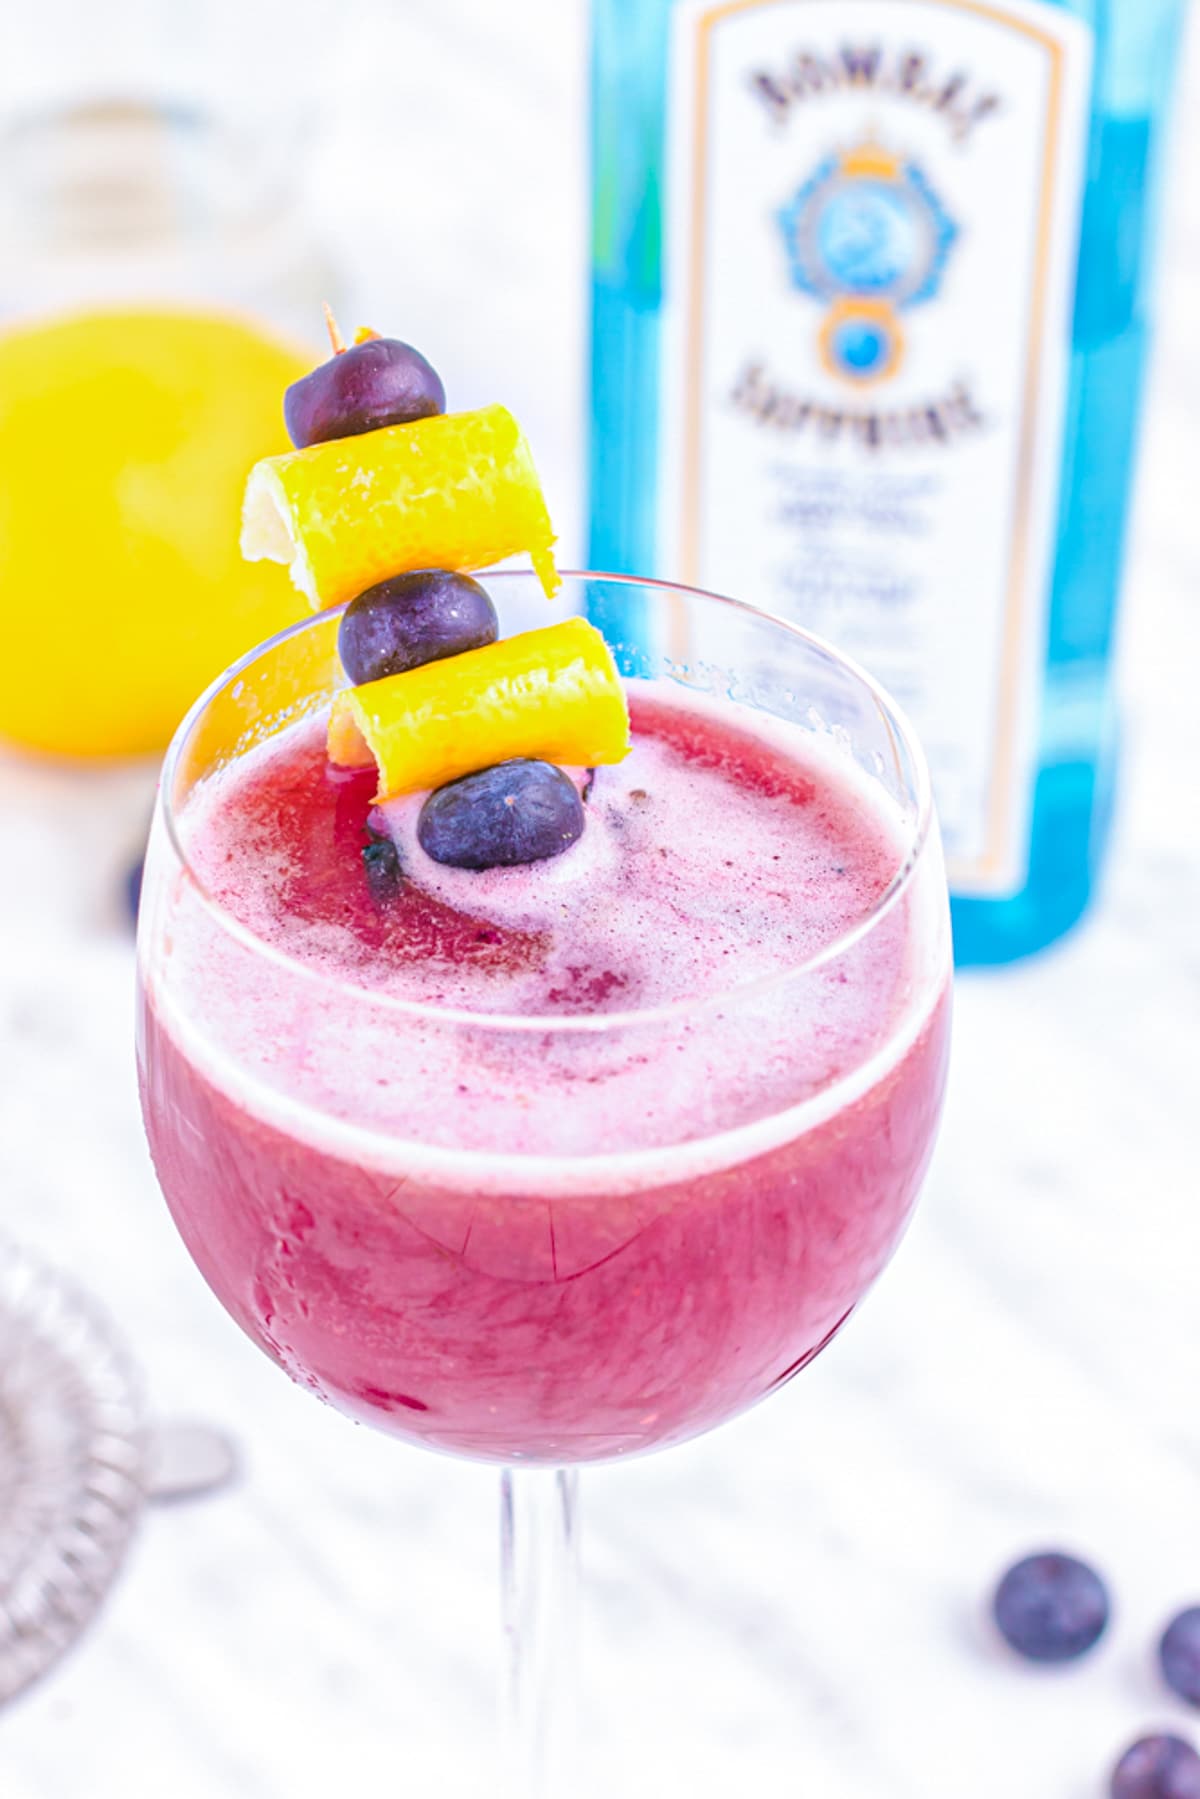 Blueberry Gin Sour Cocktail garnished with blueberries and lemon.